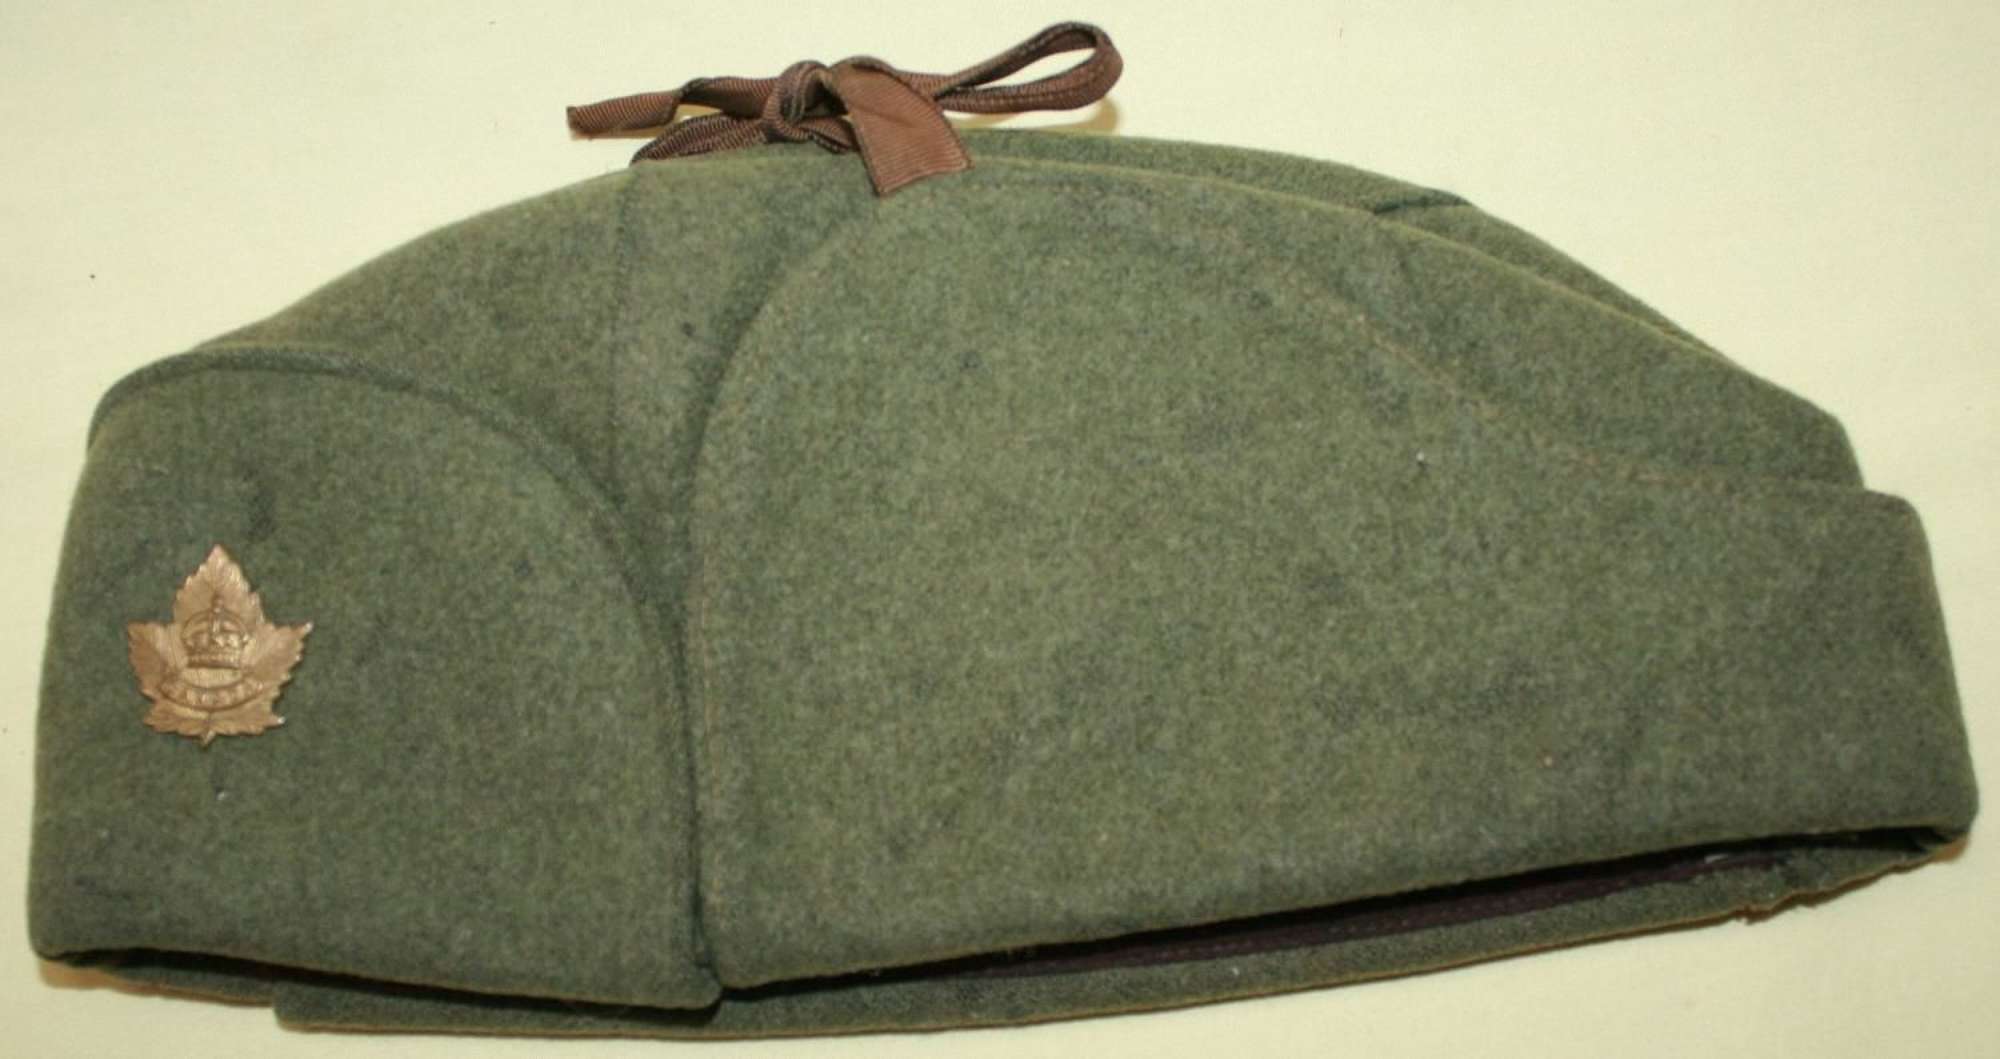 A 1942 DATED CANADIAN COLD WEATHER CAP